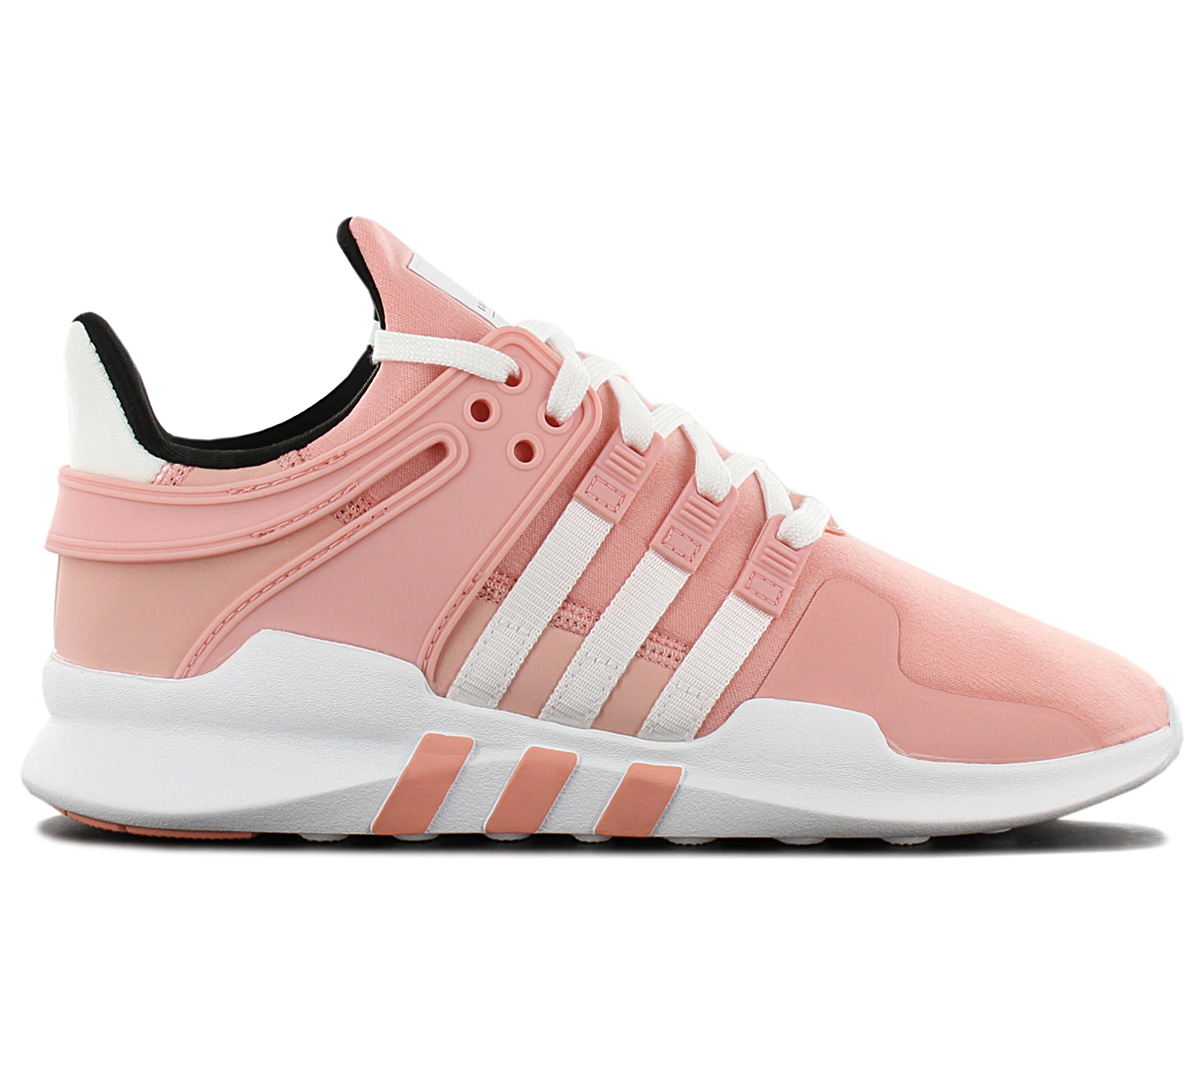 NEW adidas Originals EQT Support ADV B42022 Women`s Shoes Trainers Sneakers  SALE | eBay